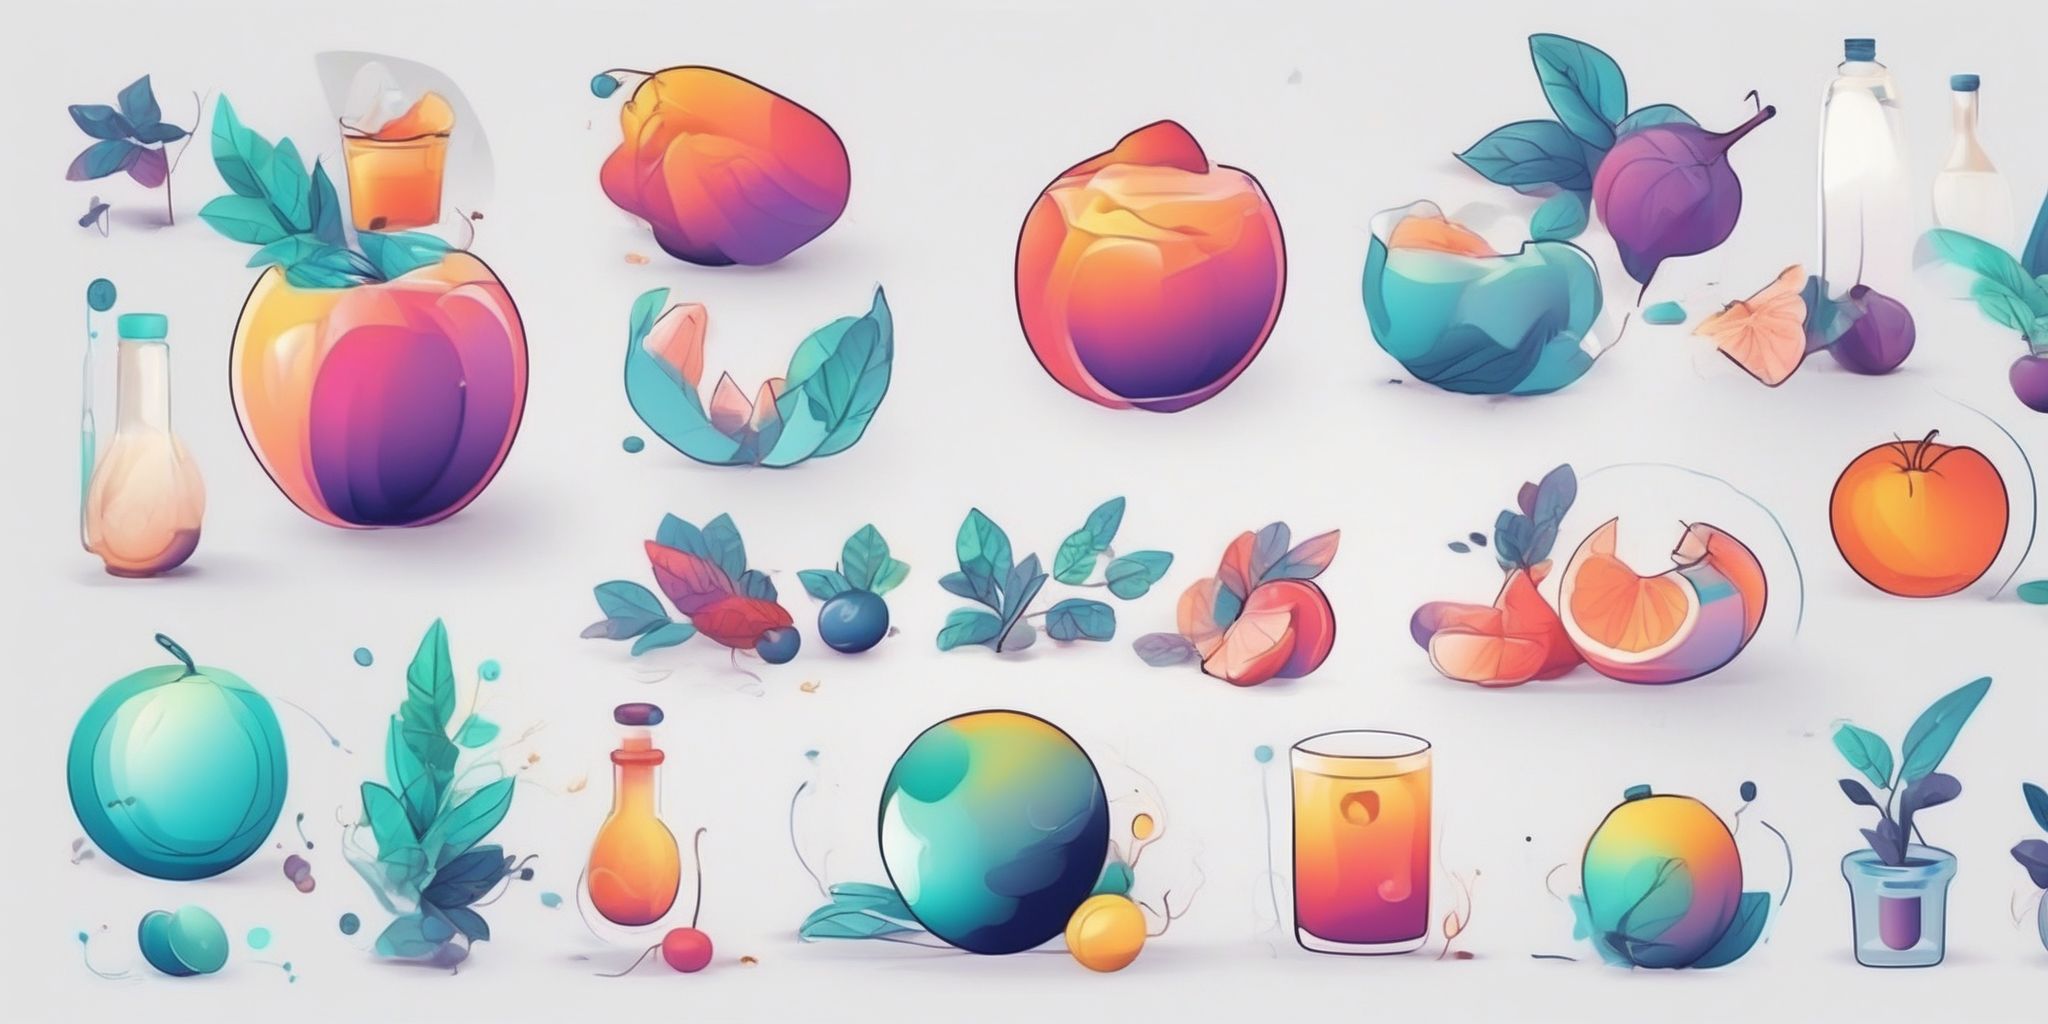 Basics in illustration style with gradients and white background